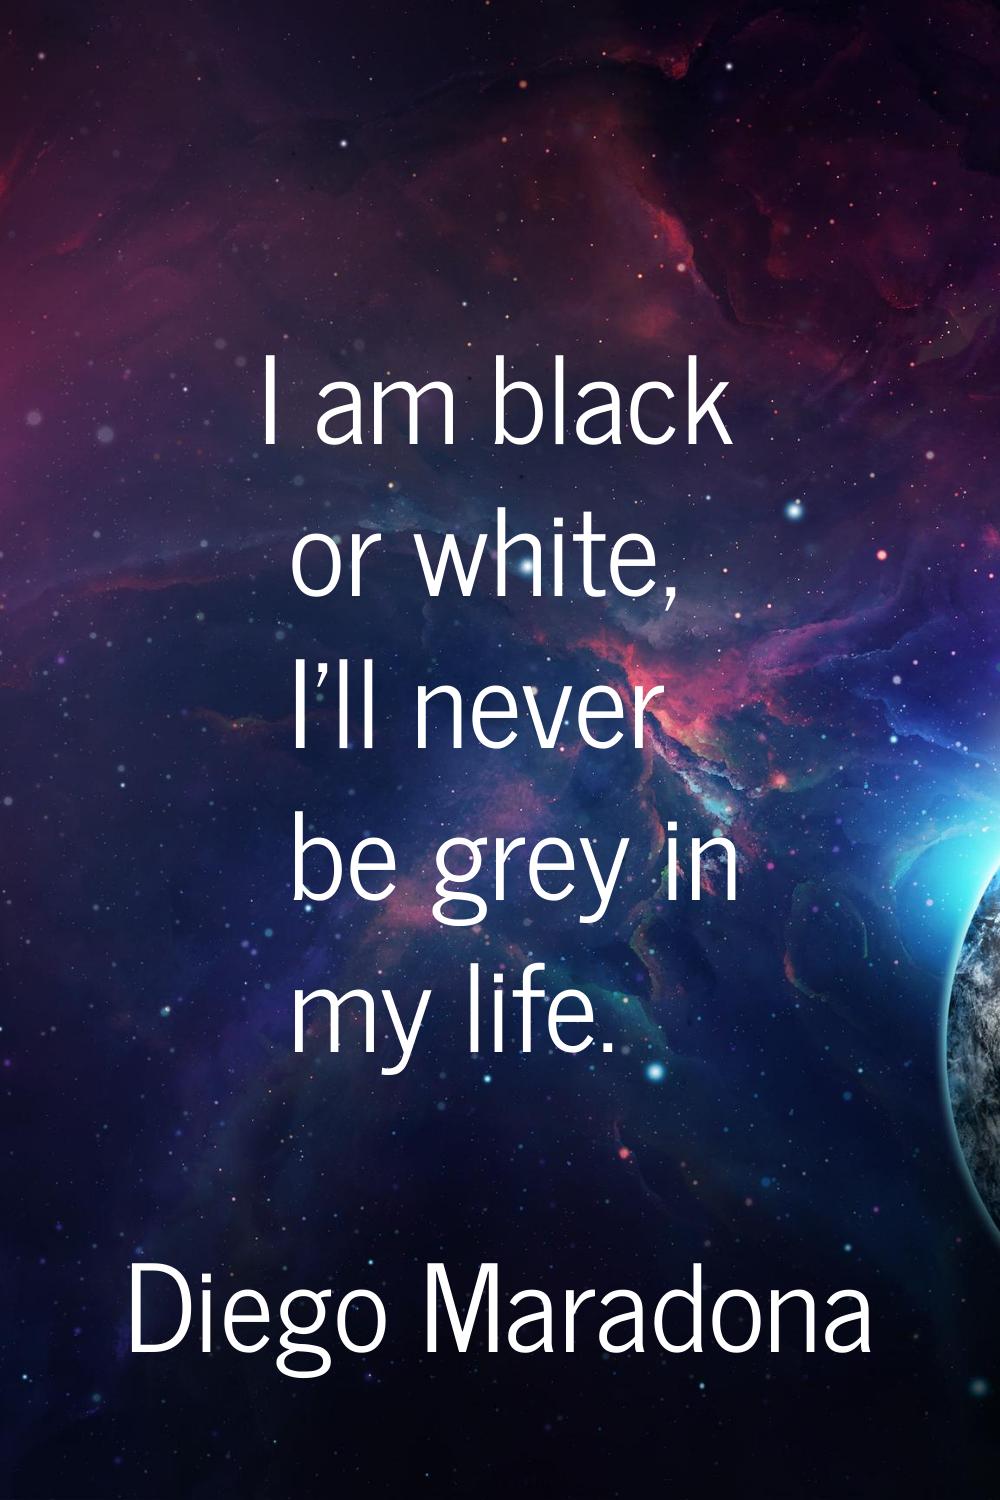 I am black or white, I'll never be grey in my life.